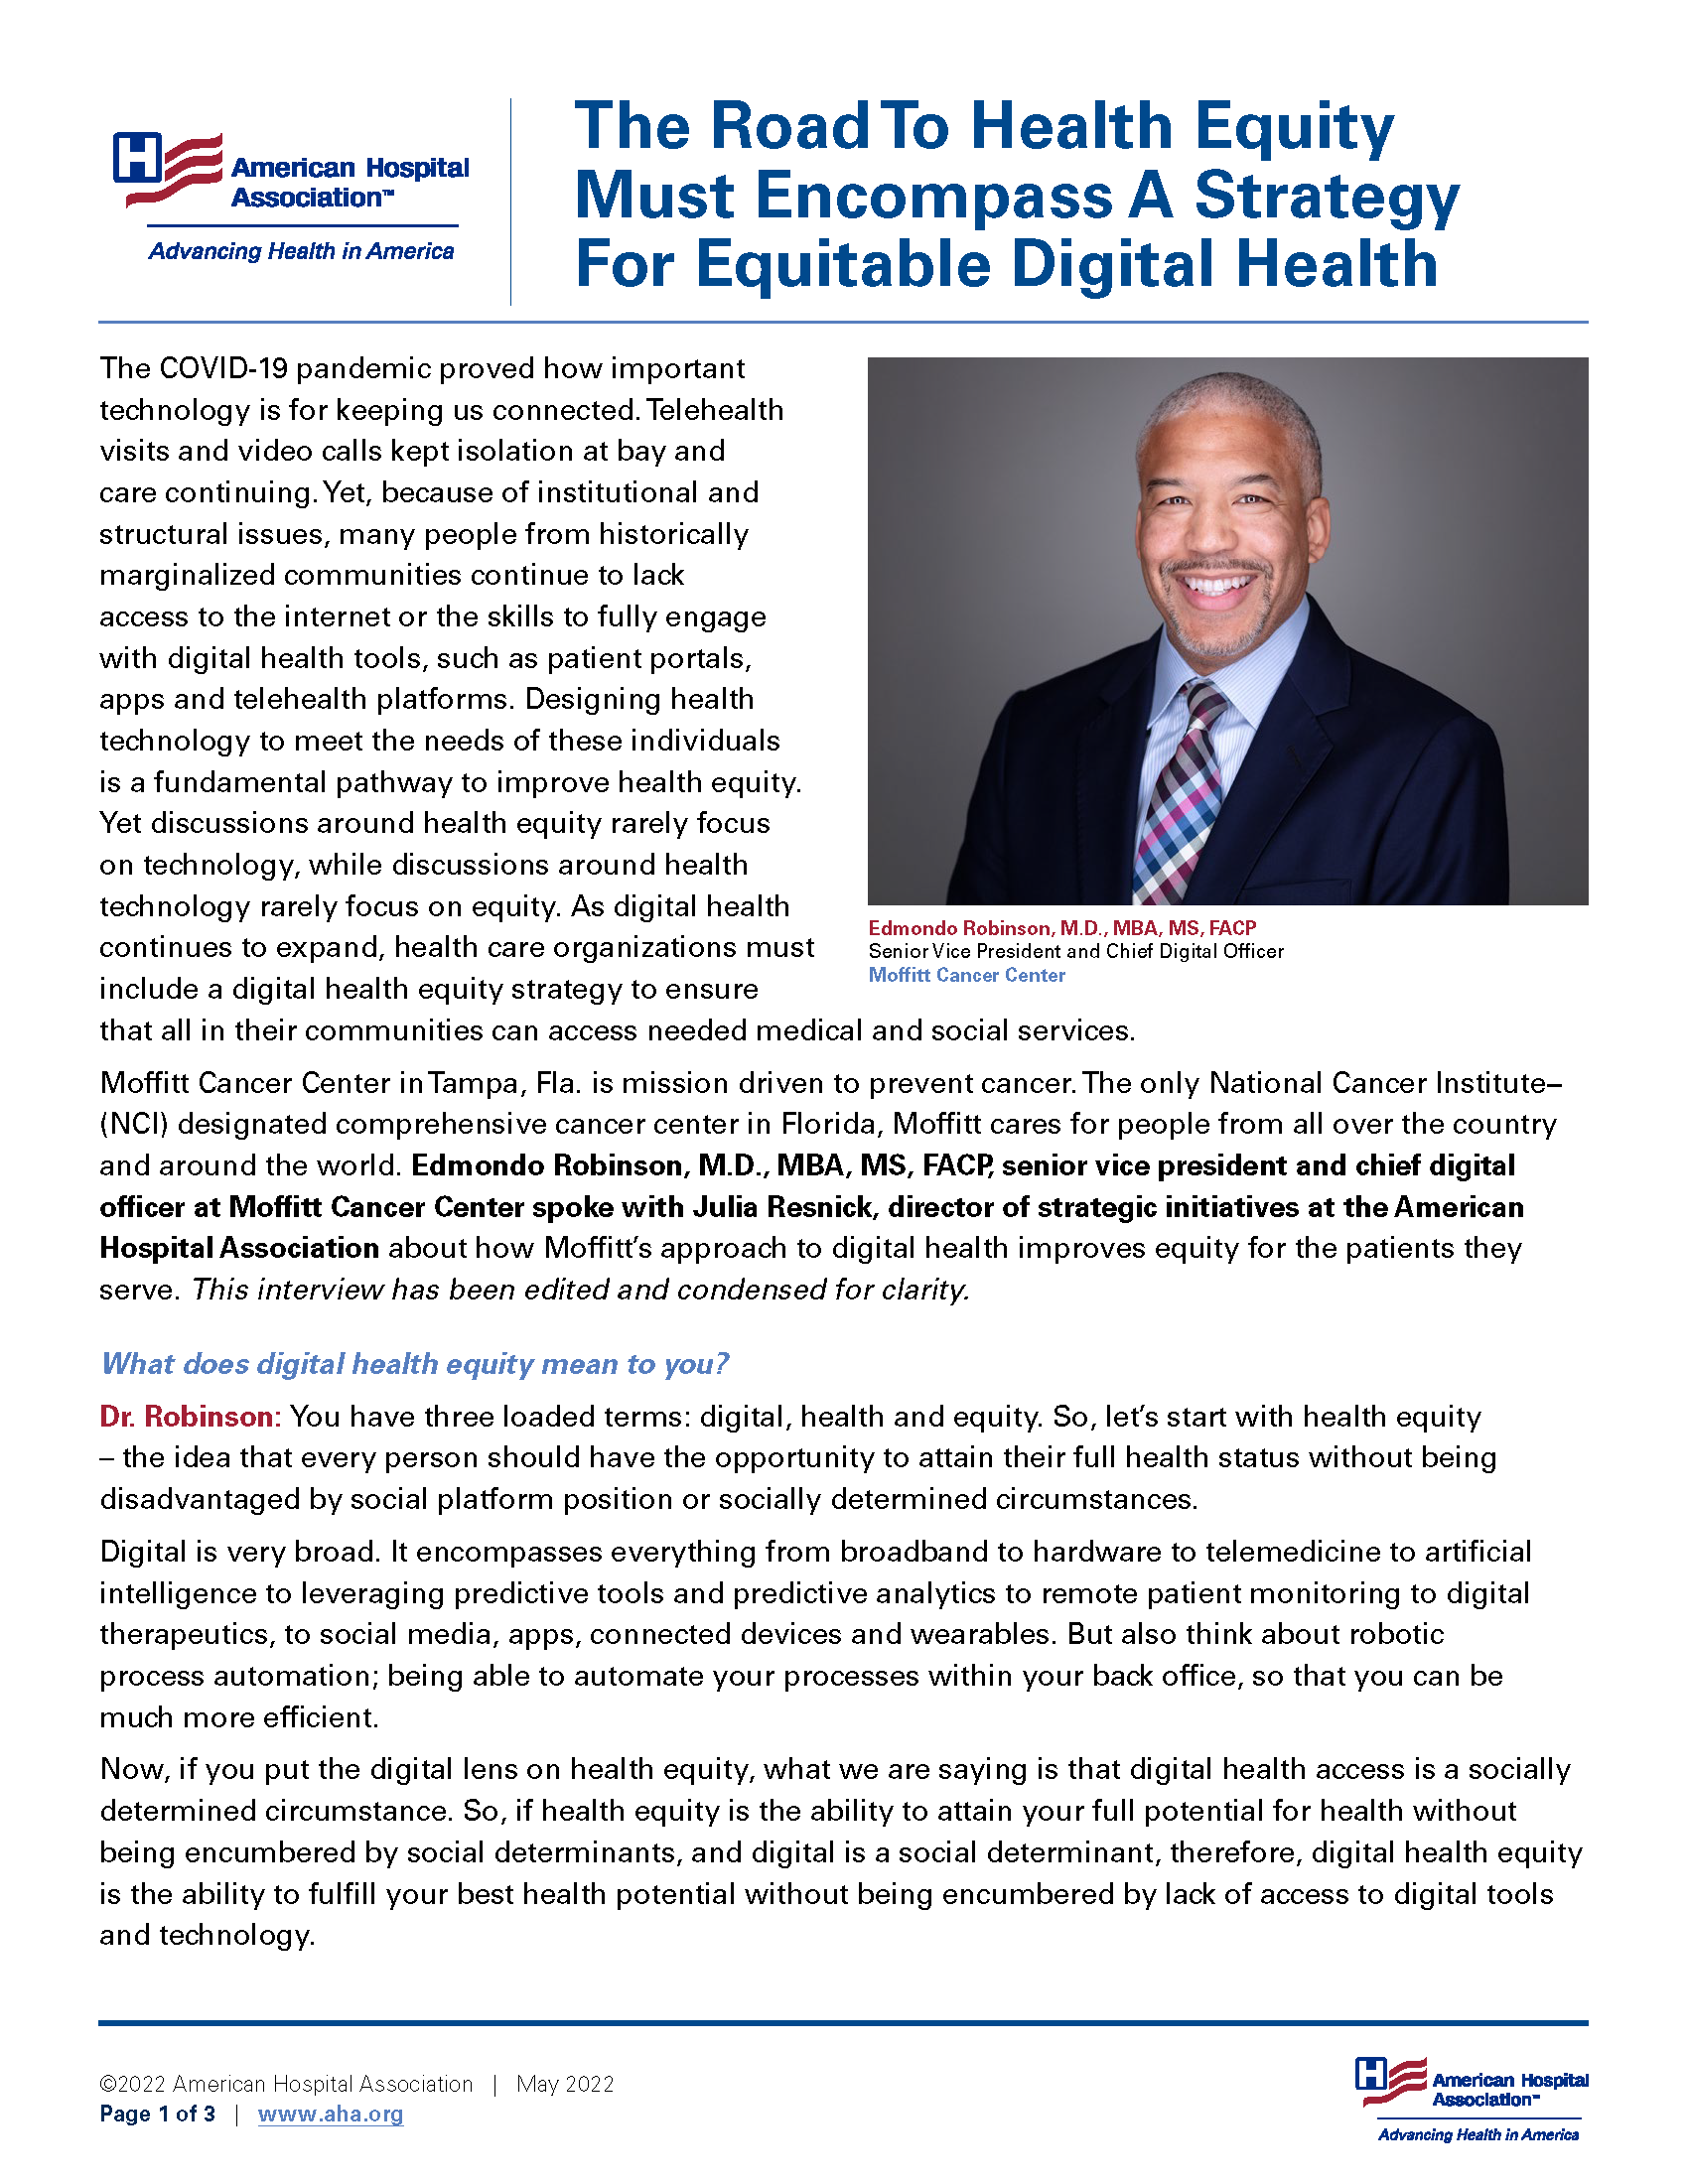 The Road to Health Equity Must Encompass a Strategy for Equitable Digital Health page 1.